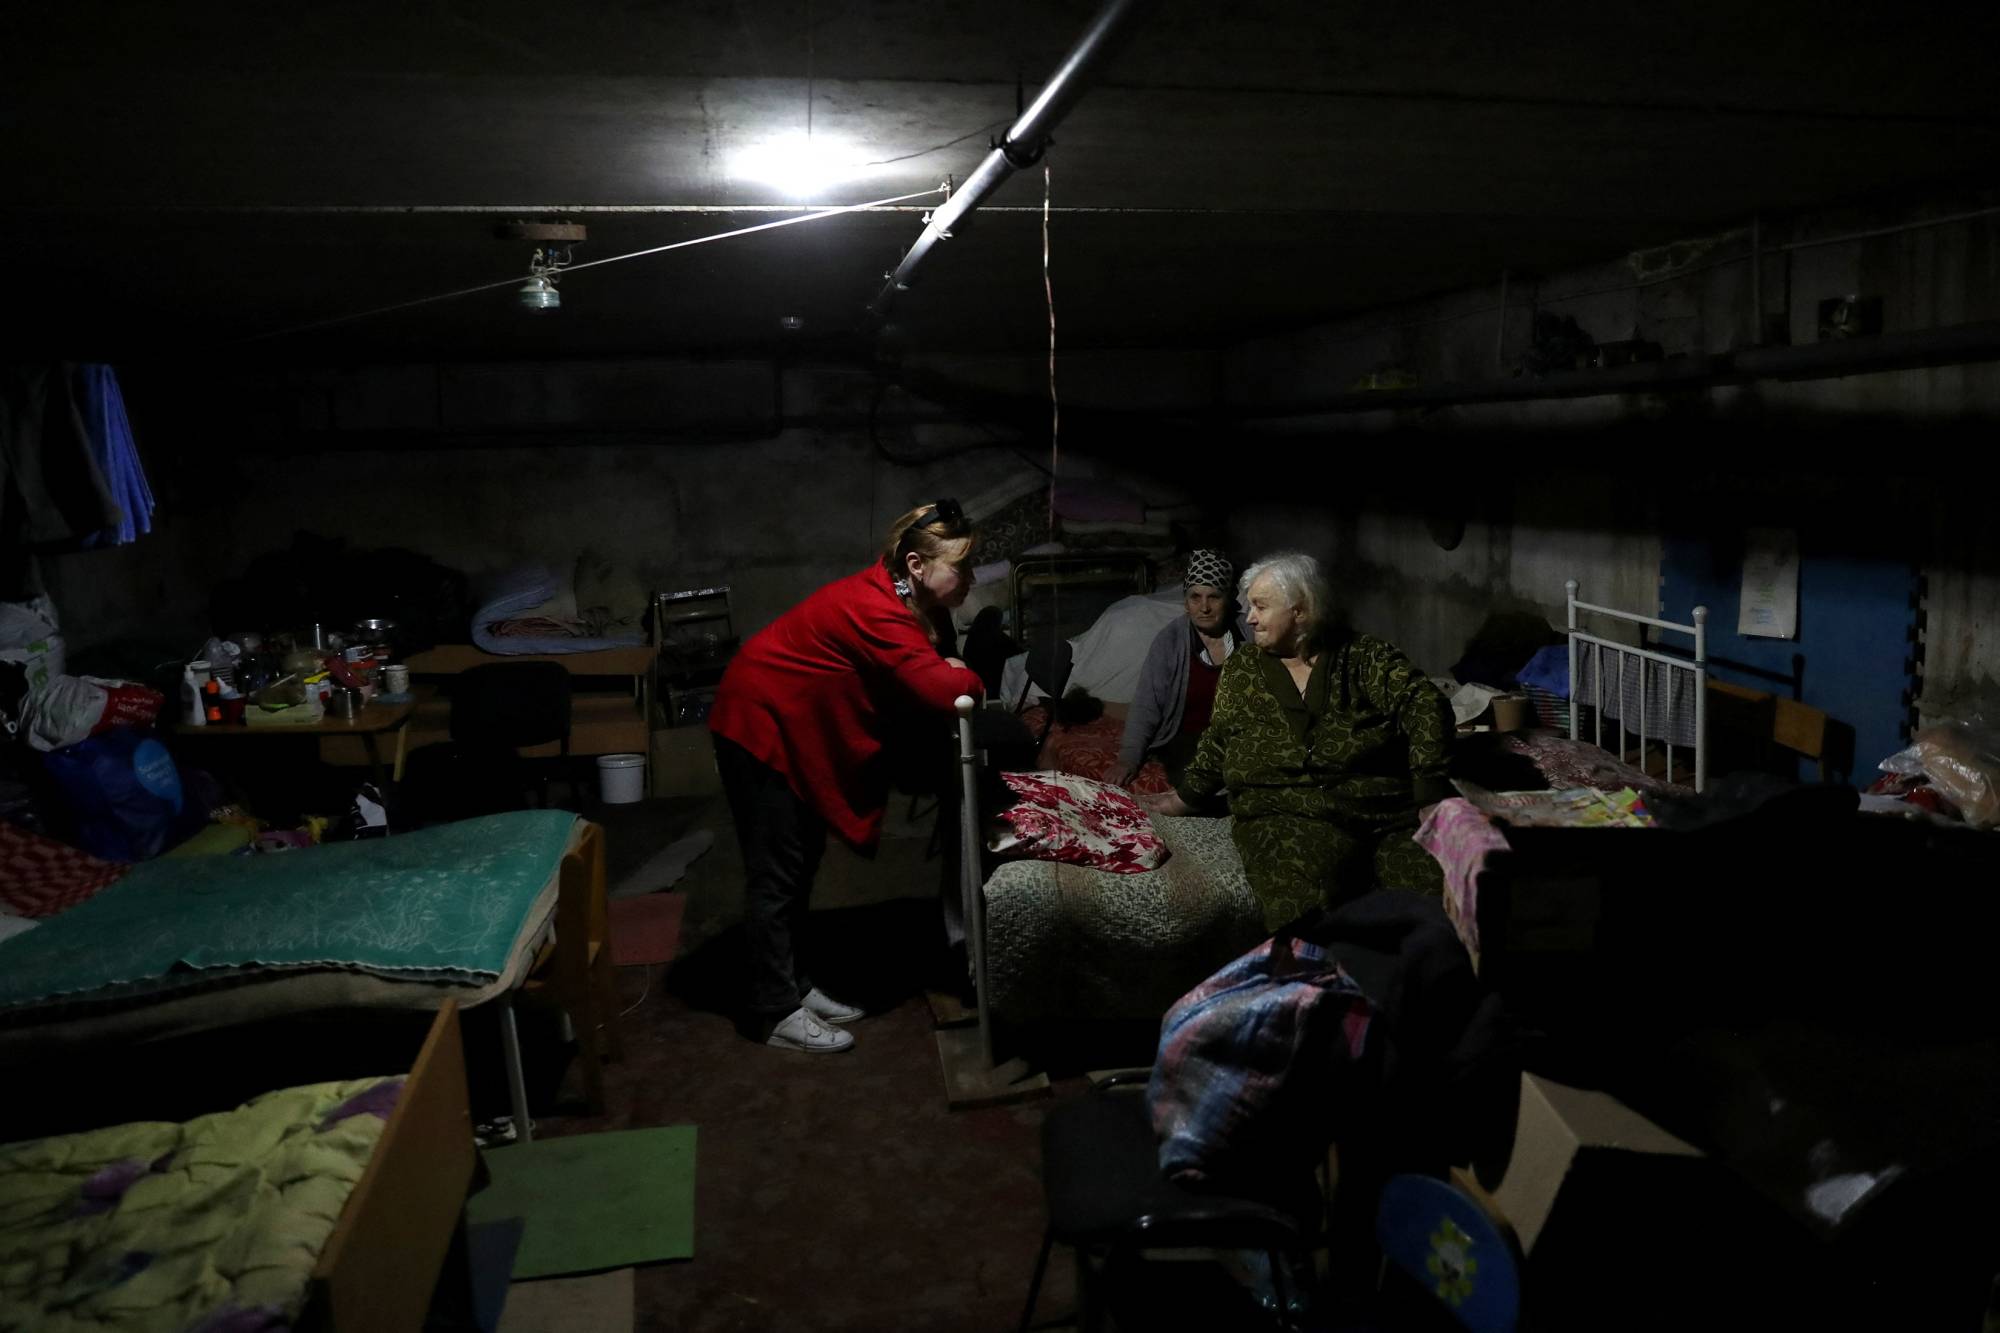 Nataliia Kyrychenko, a member of the Vilkhivka village council, who was detained by Russian soldiers while her village of Kutuzivka was occupied, talks to local residents living inside an underground shelter on June 1. | REUTERS